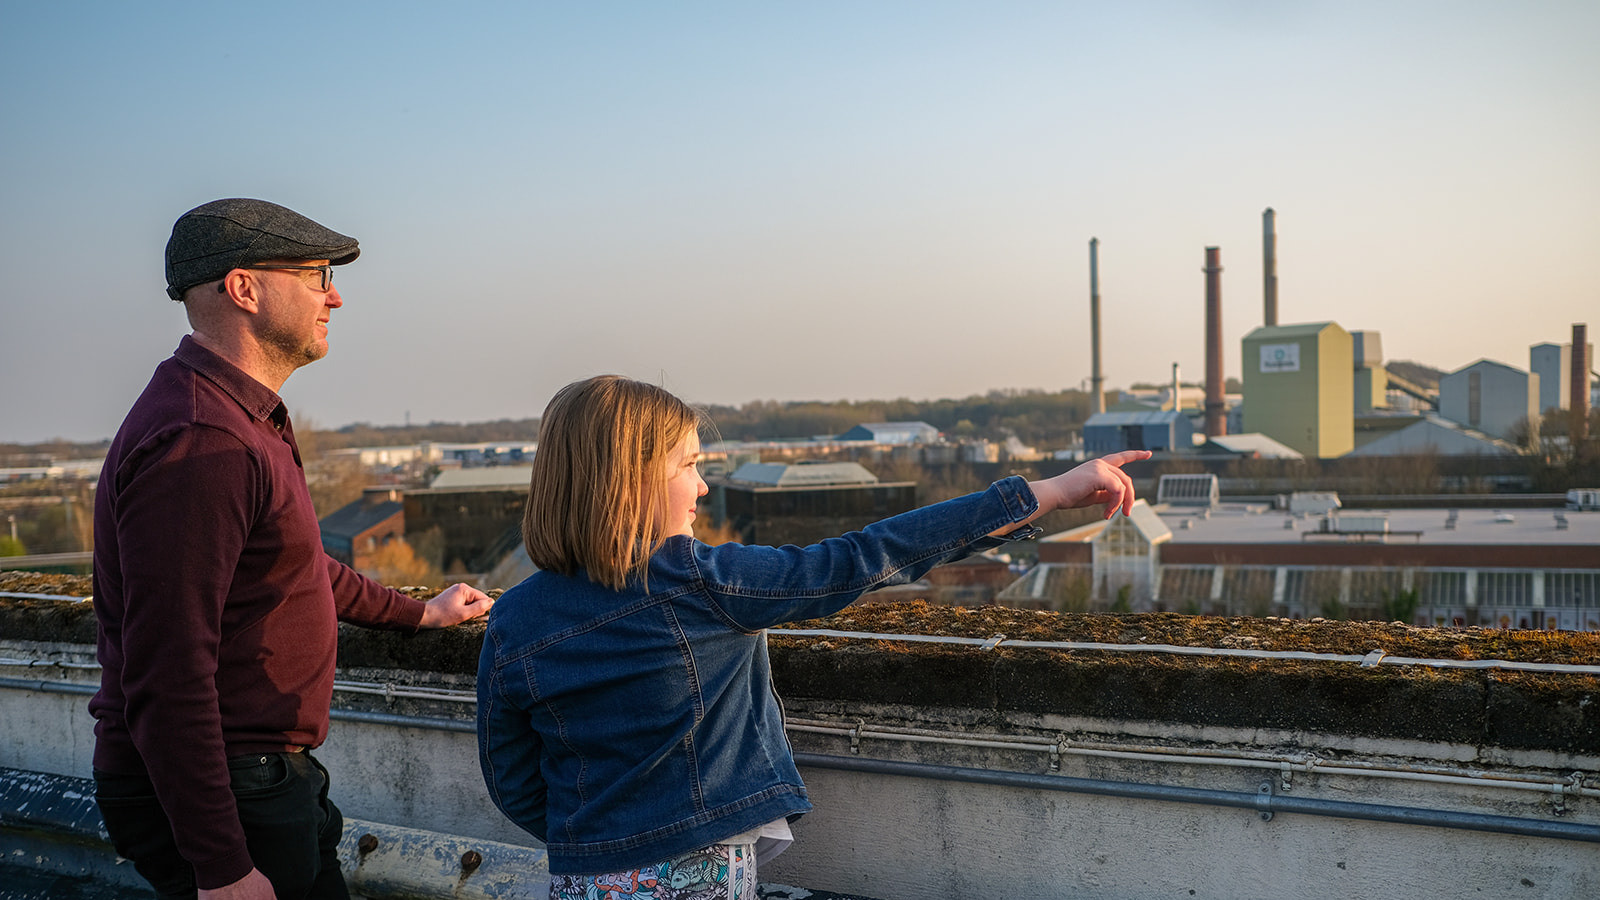 Two people, a child and an adult, stand in the evening light looking out over St Helens. The child is pointing to something in the distance.